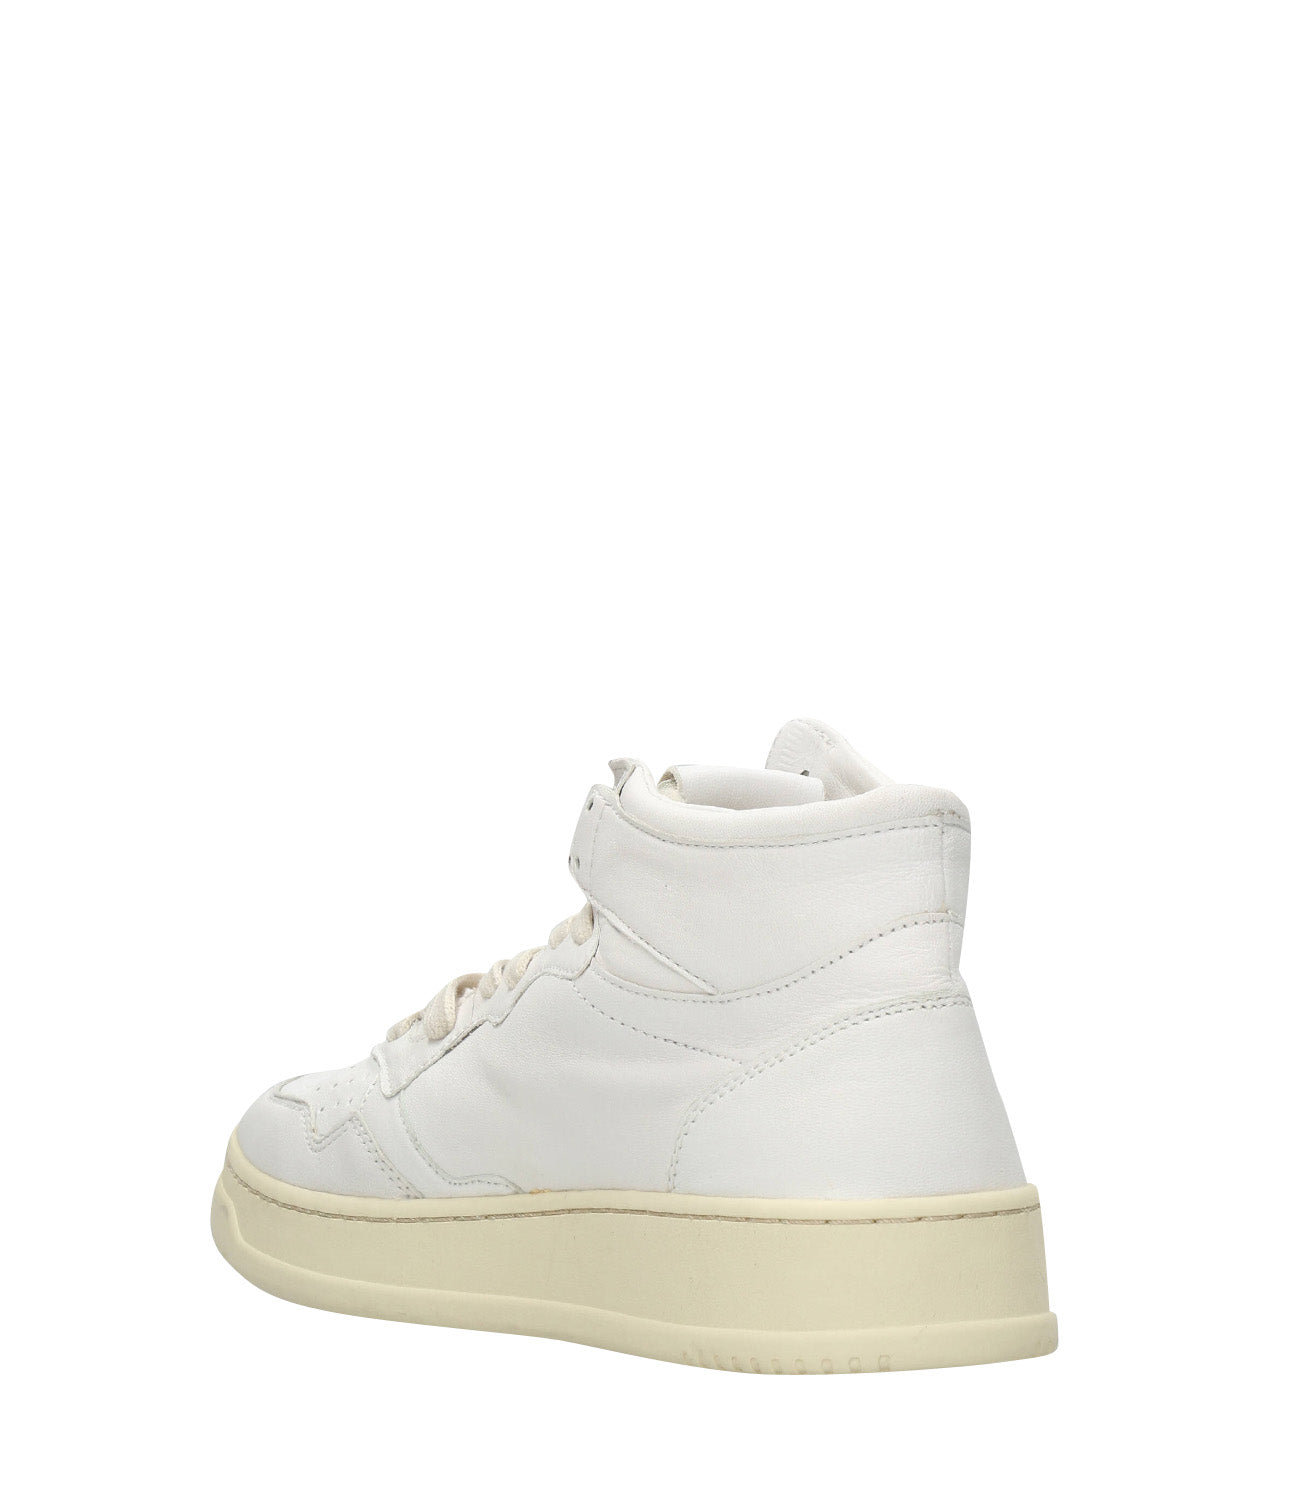 Autry | Medalist Mid White Sneakers